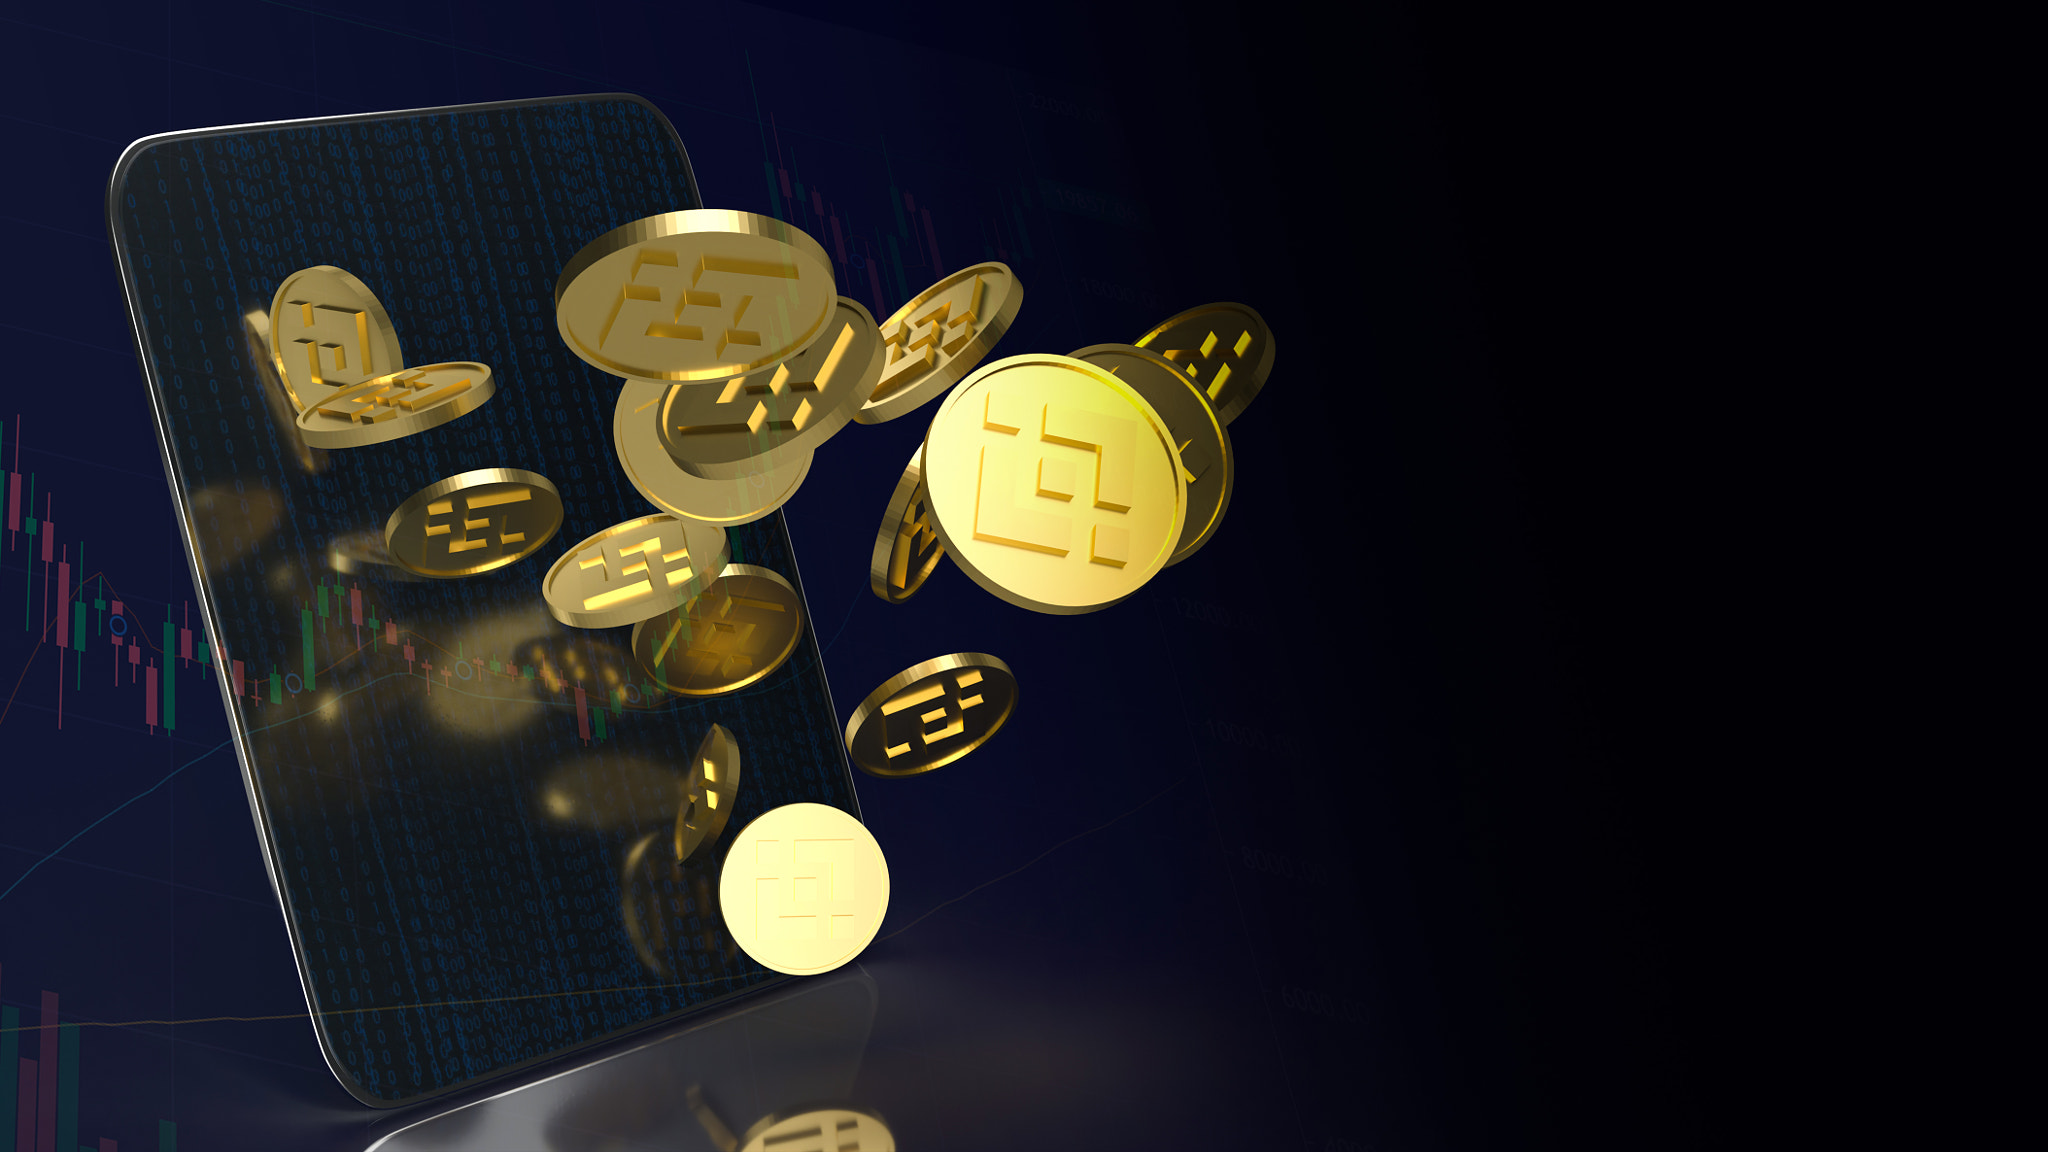 The BNB or Coin cryptocurrency Binance for cryptocurrency Business concept 3d rendering, Bangkok ,Th